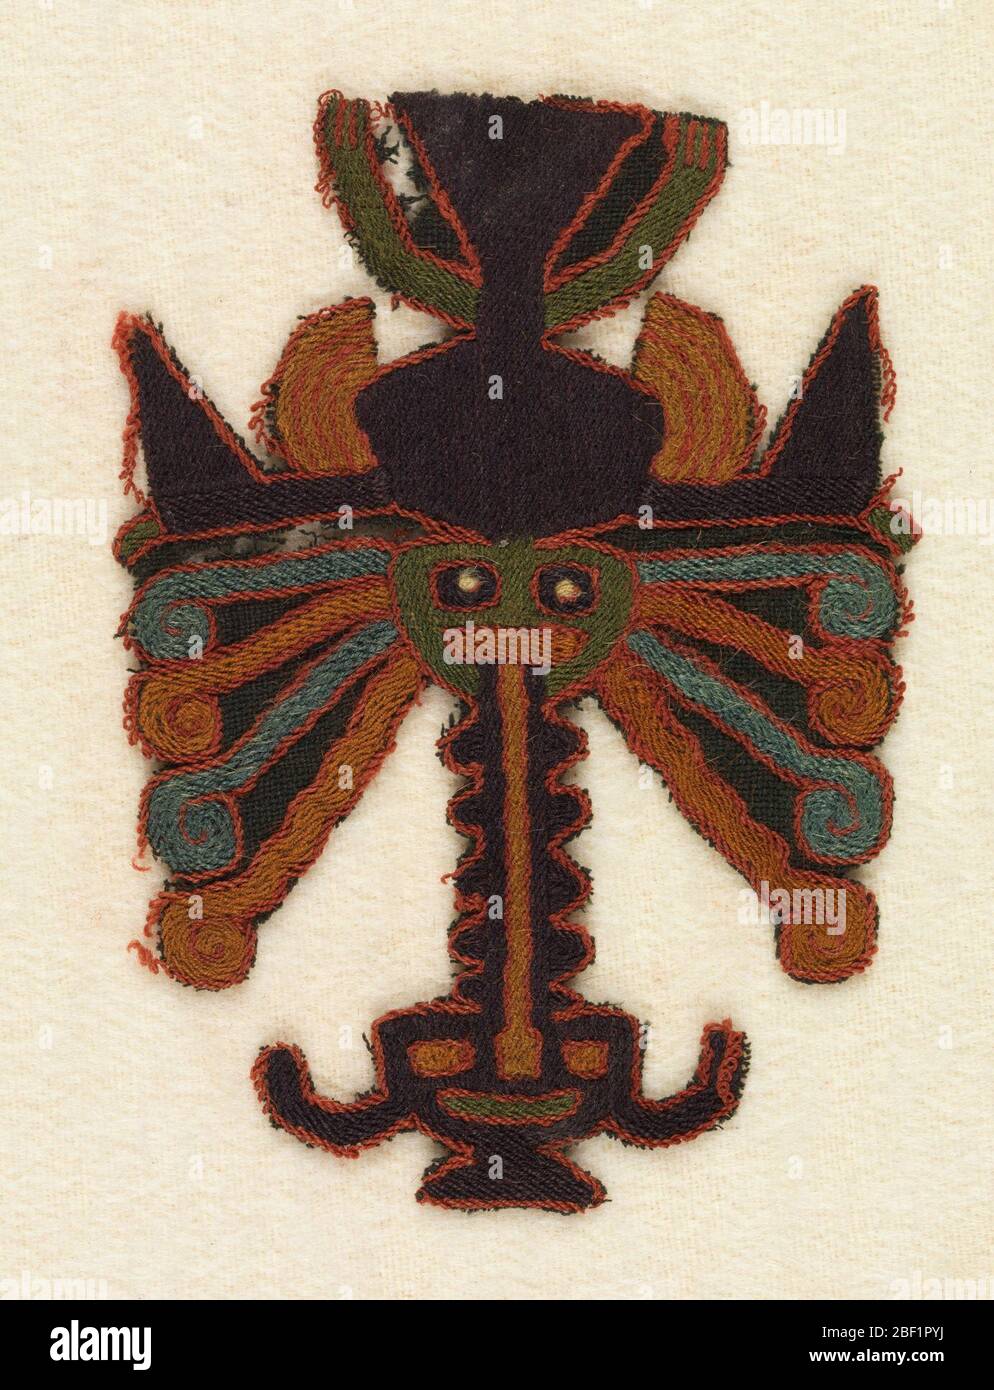 Fragment. Figure wearing a mask with many appendages and trophy head. Embroidered in strong colors. Stock Photo